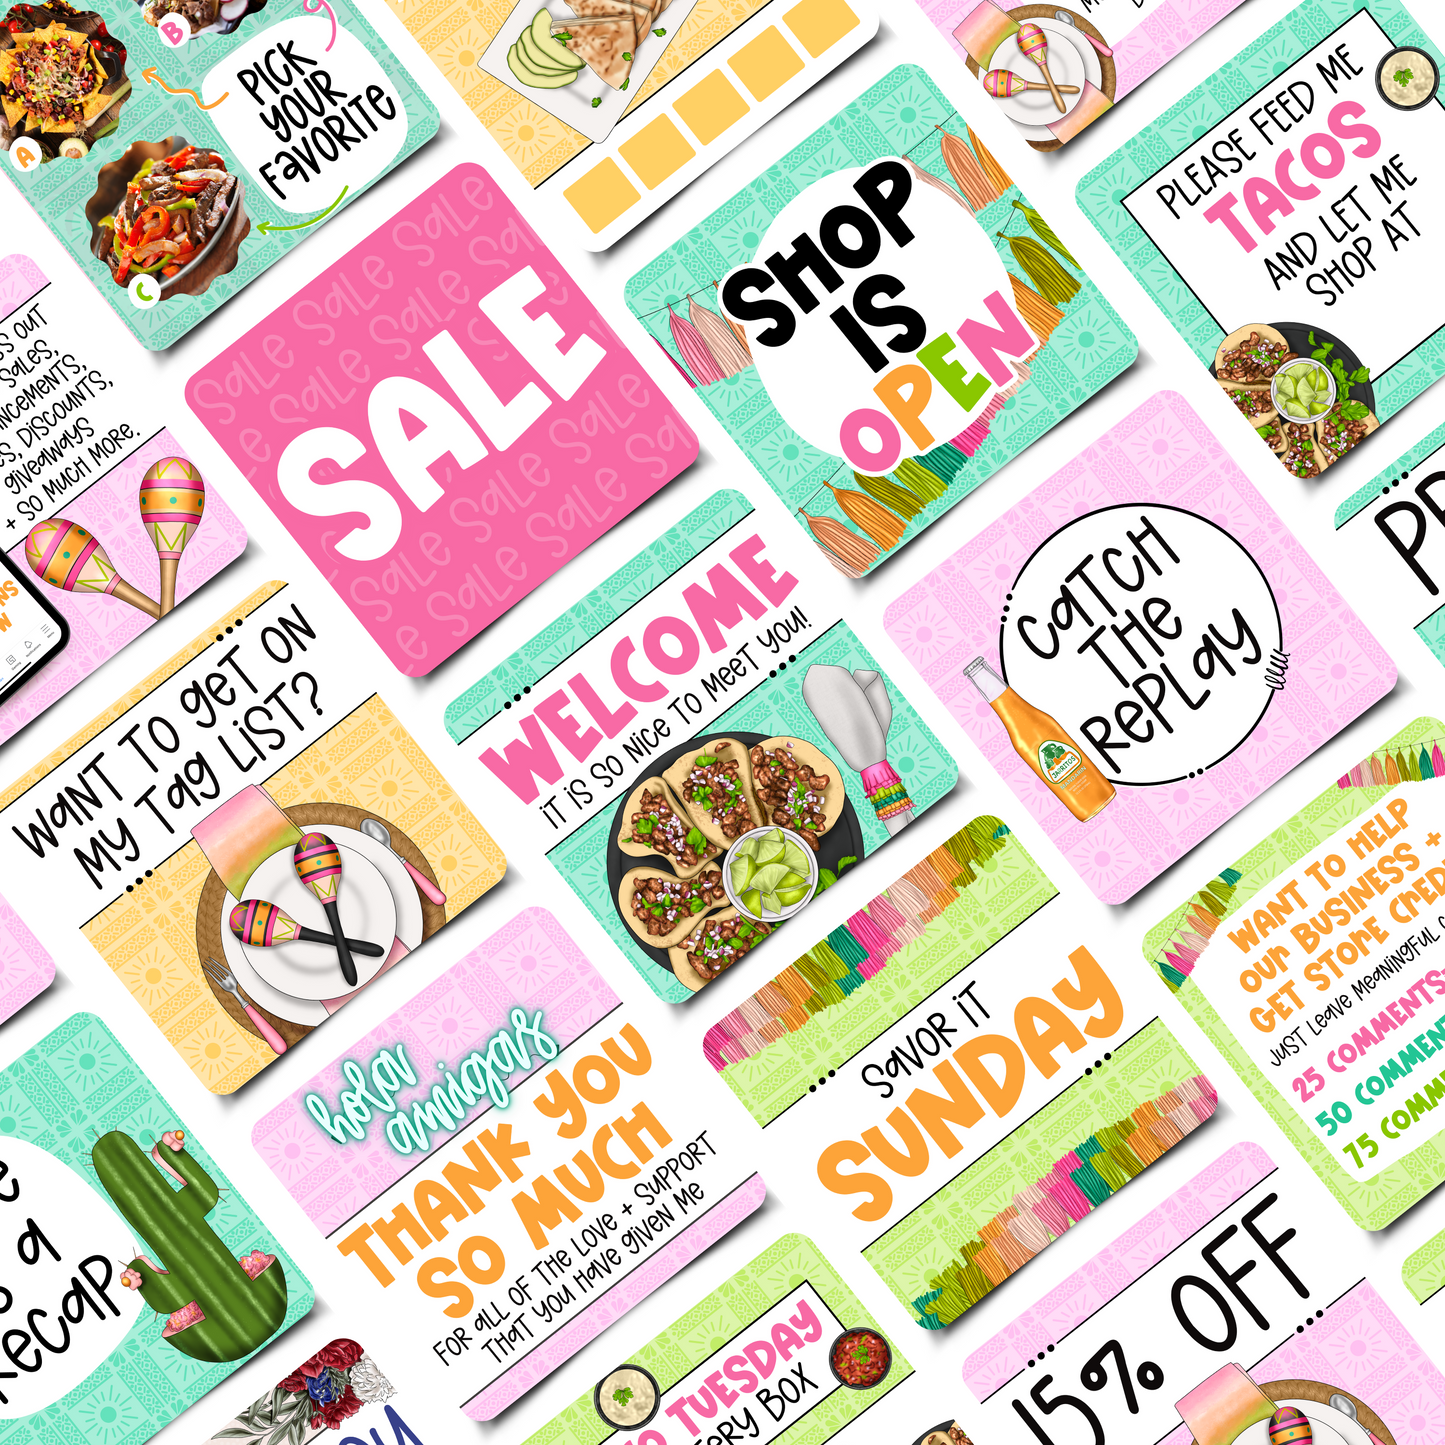 Taco Tuesday Business Engagement & Social Media Content Graphics Collection